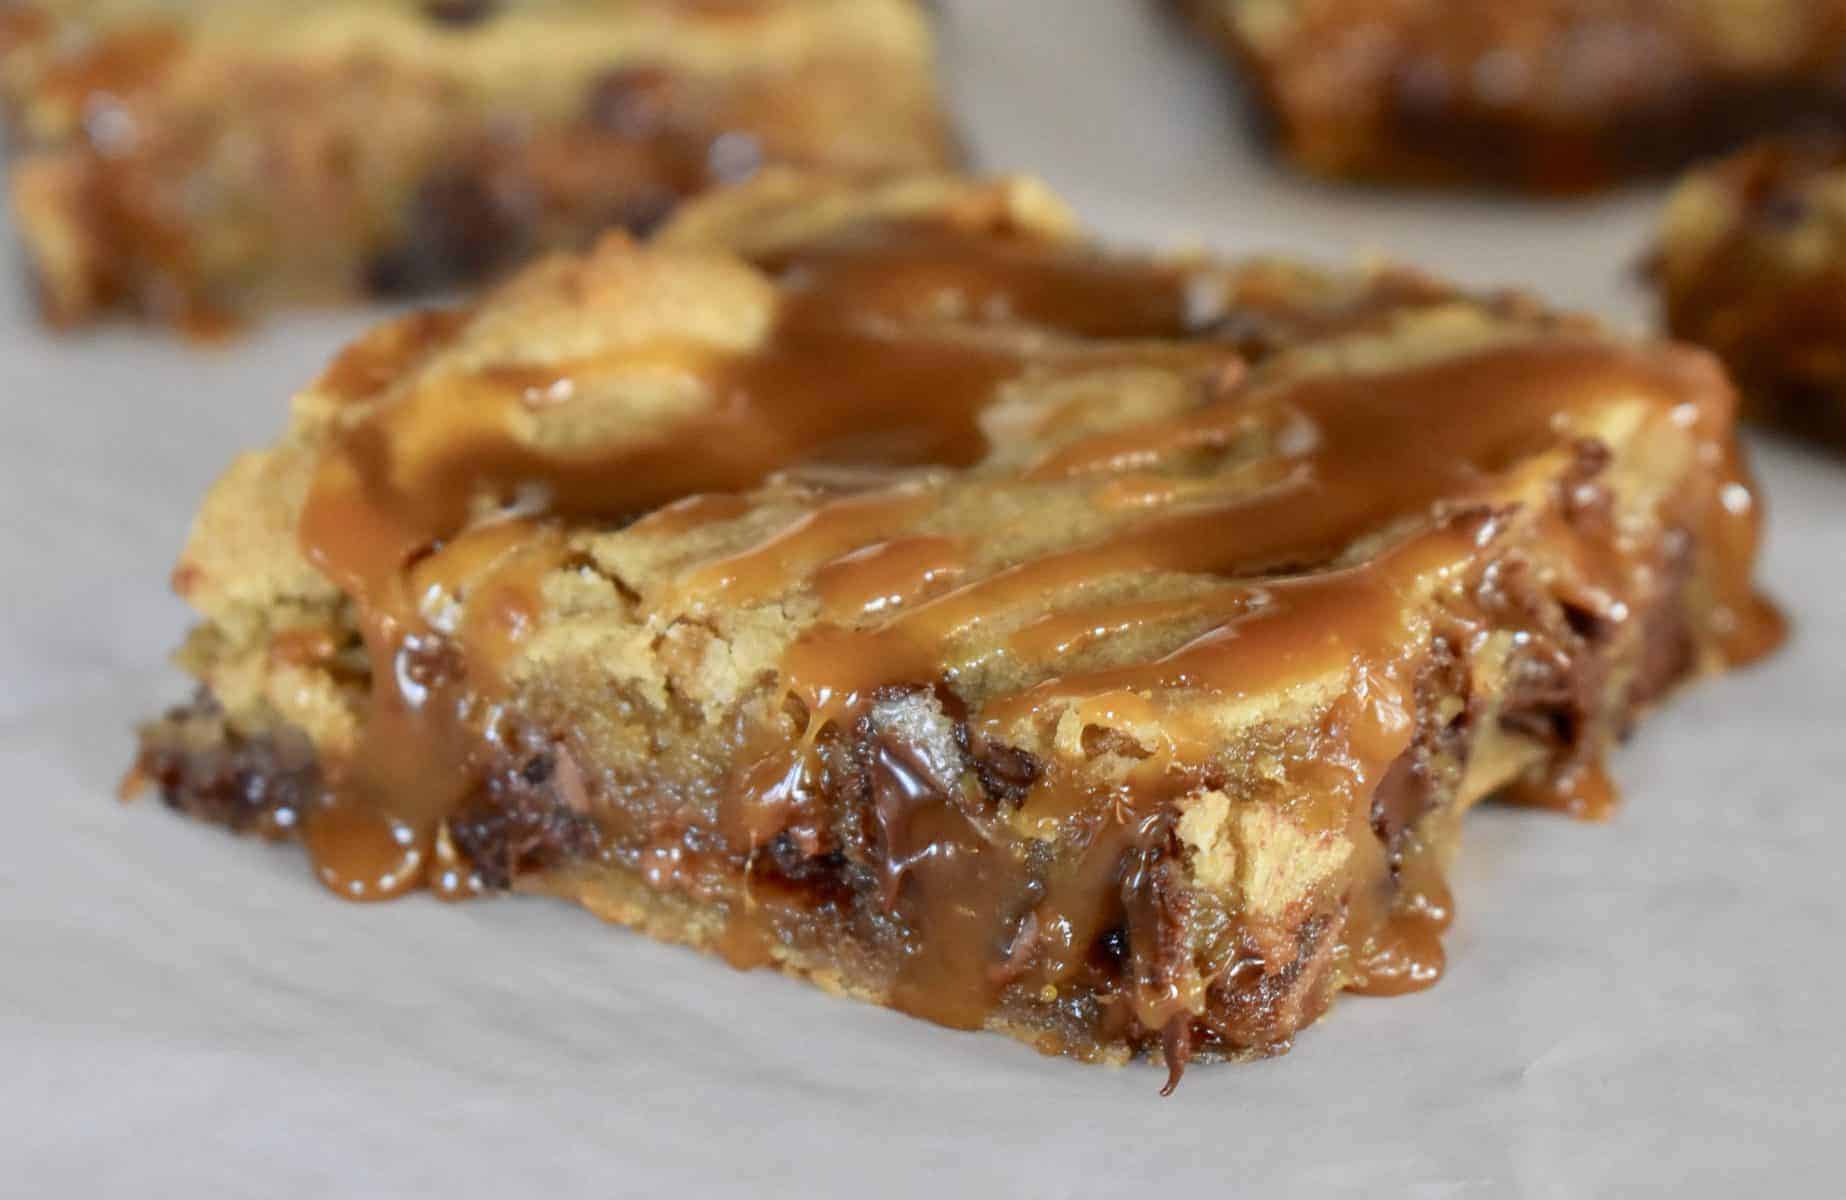 Milky Way Blondie with caramel drizzled overtop. 